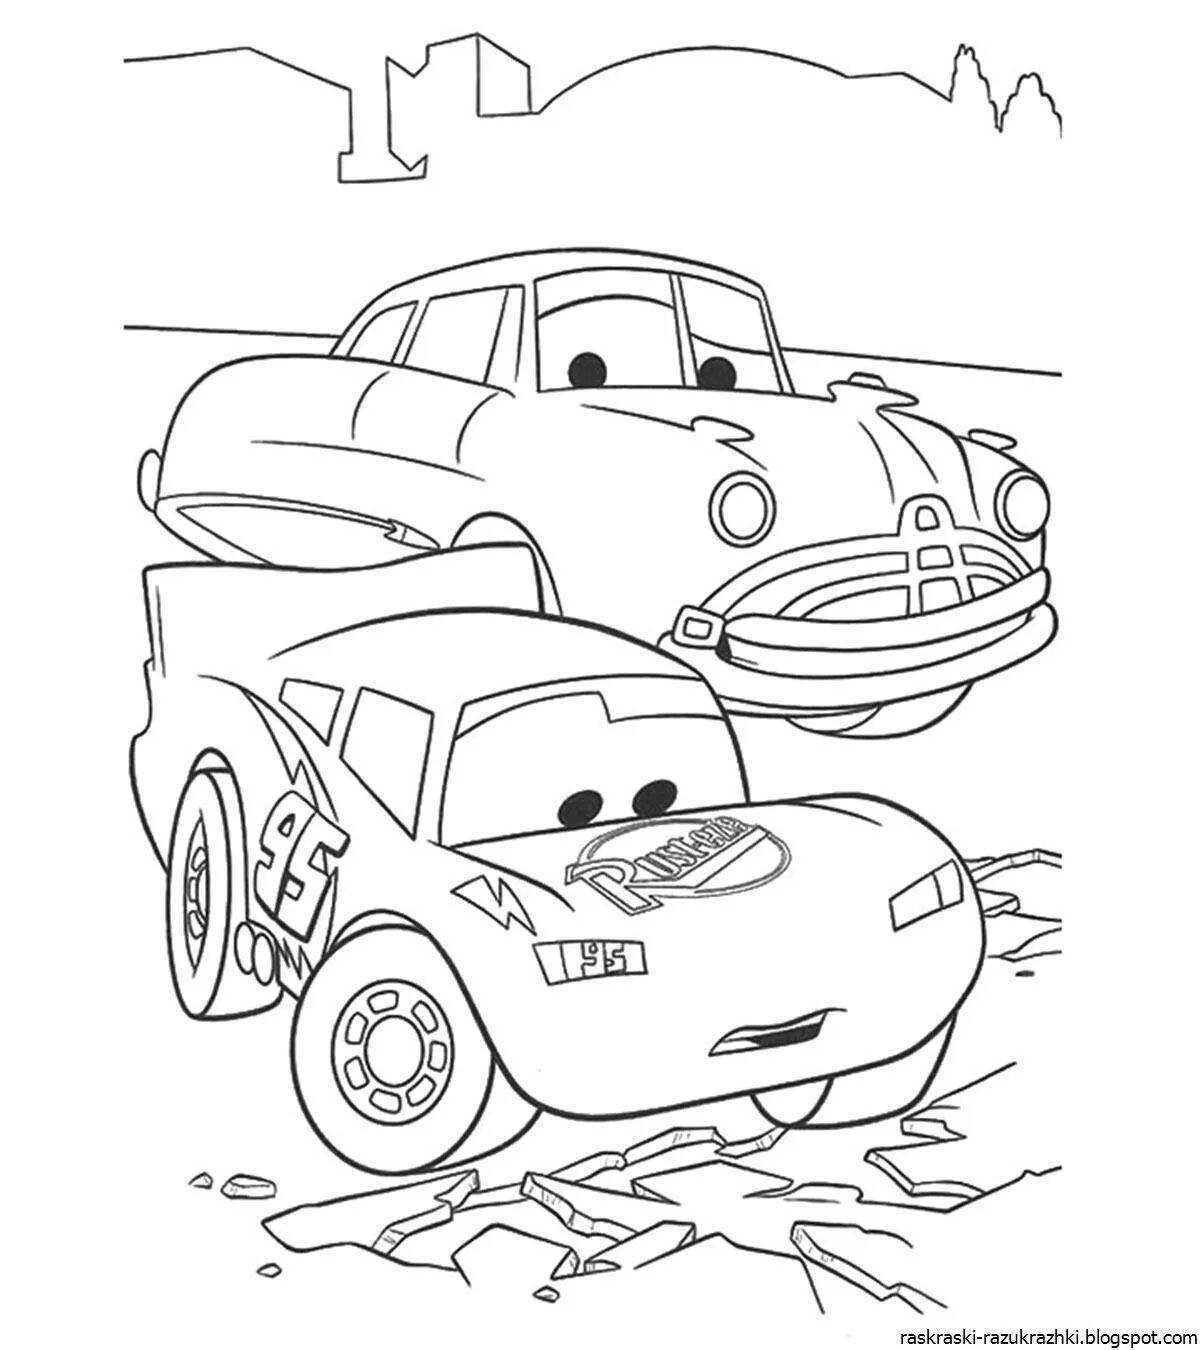 Sally's amazing cars coloring page